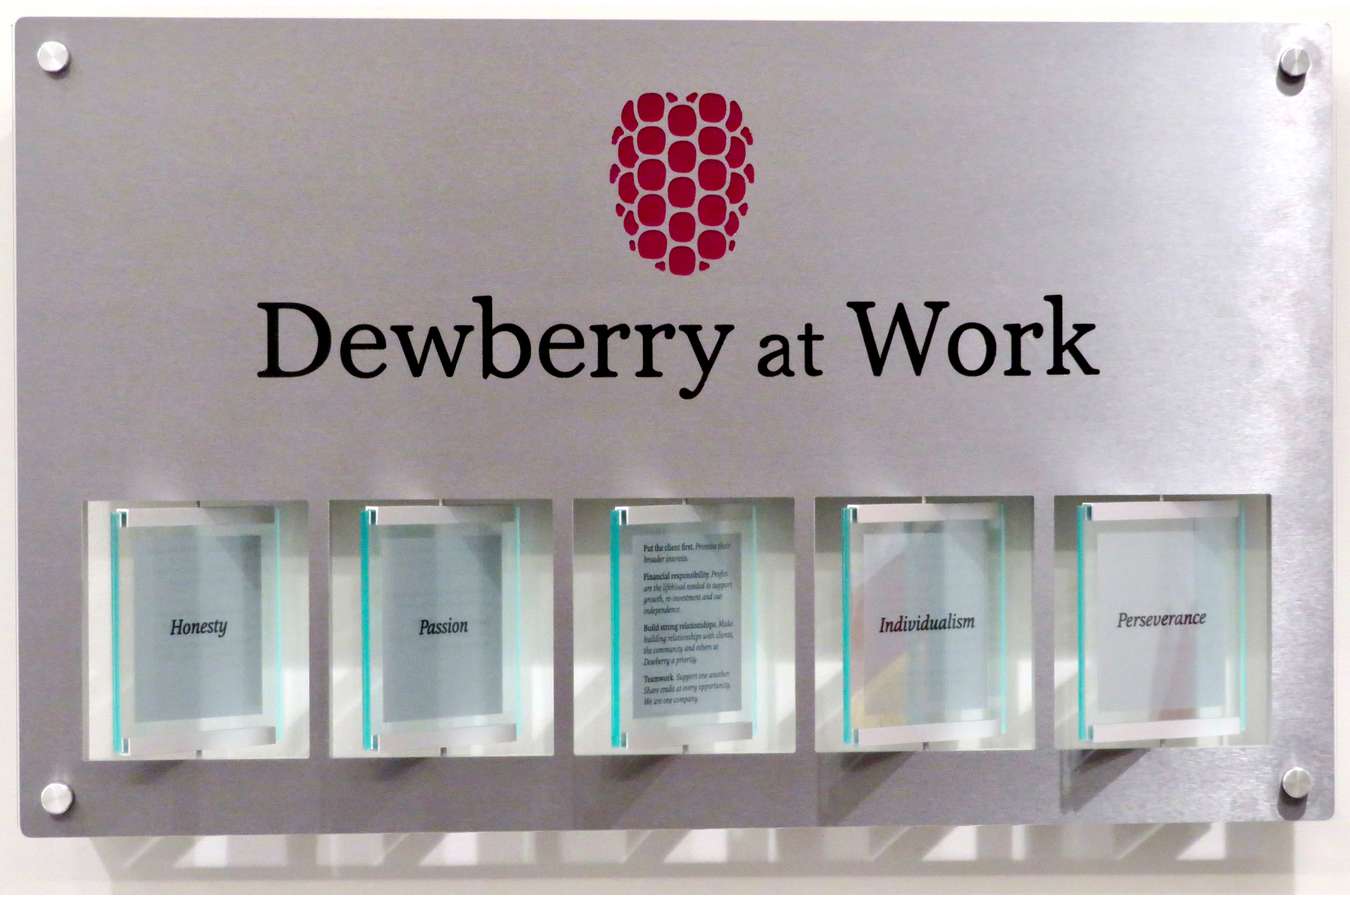 420_Dewberry Spinner : Dewberry Works – Nationwide Office Lobby Signs – keywords spin to reveal corporate philosophy in 